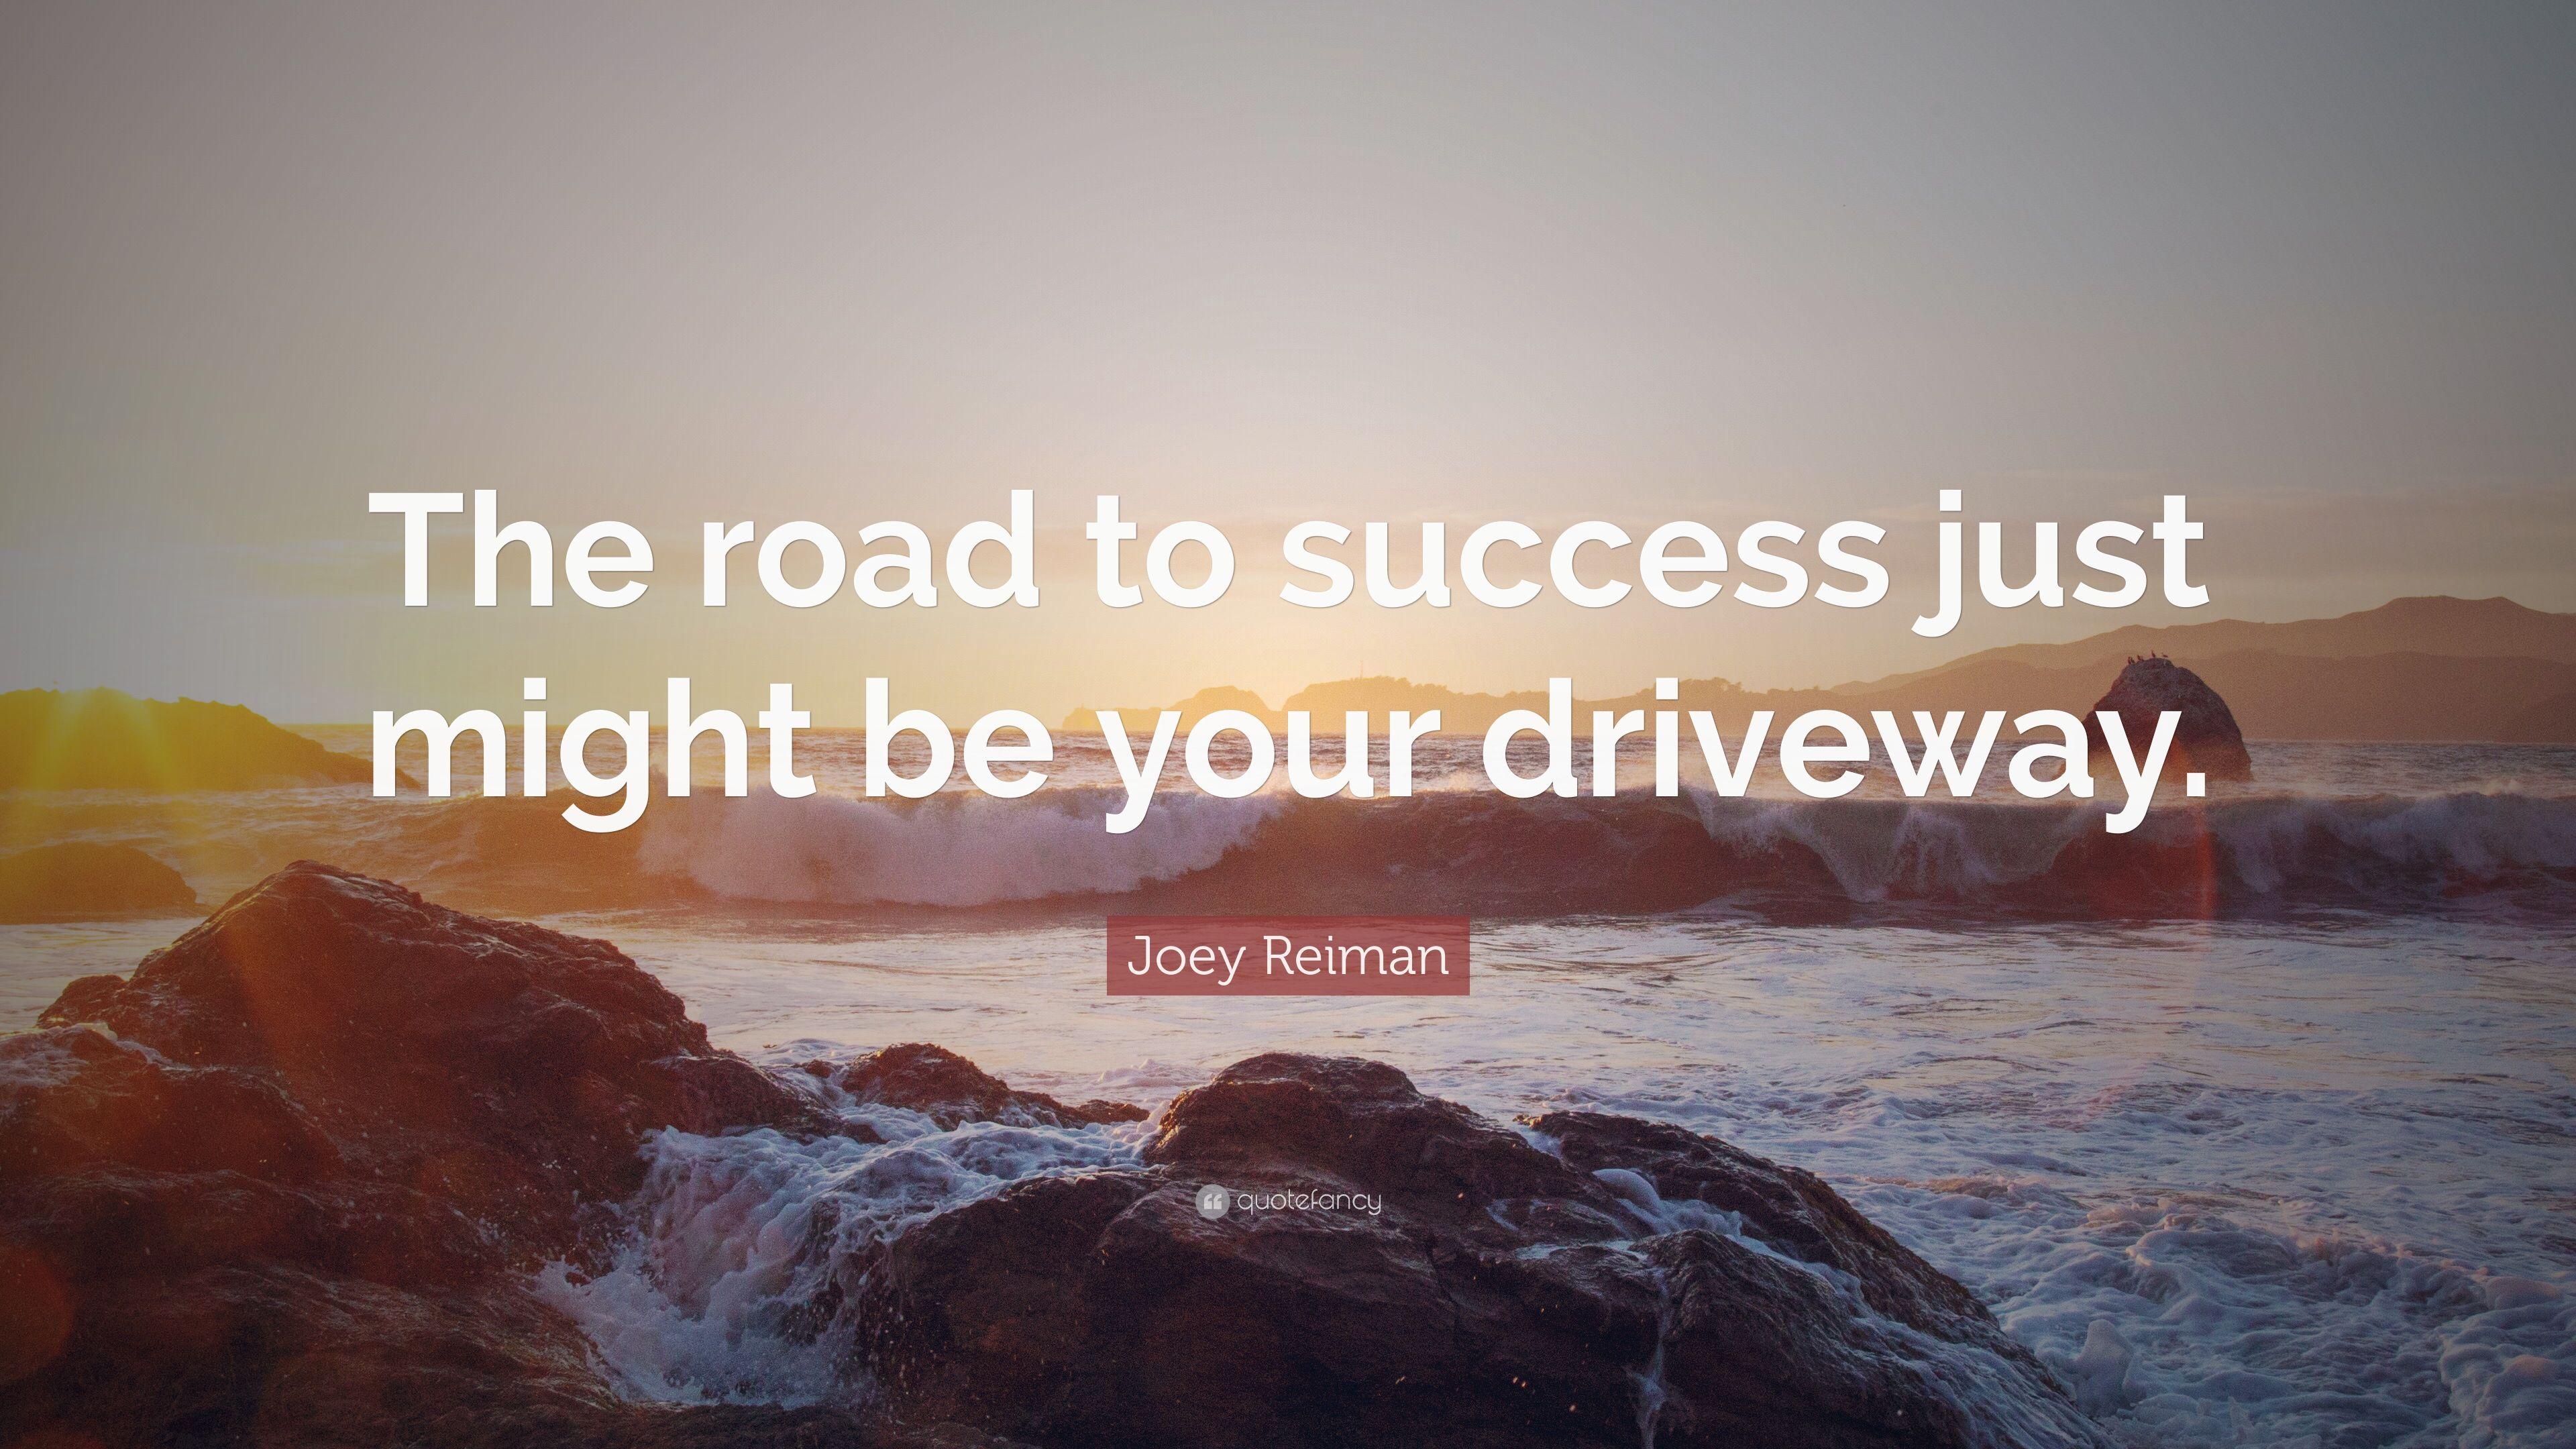 Joey Reiman Quote: “The road to success just might be your